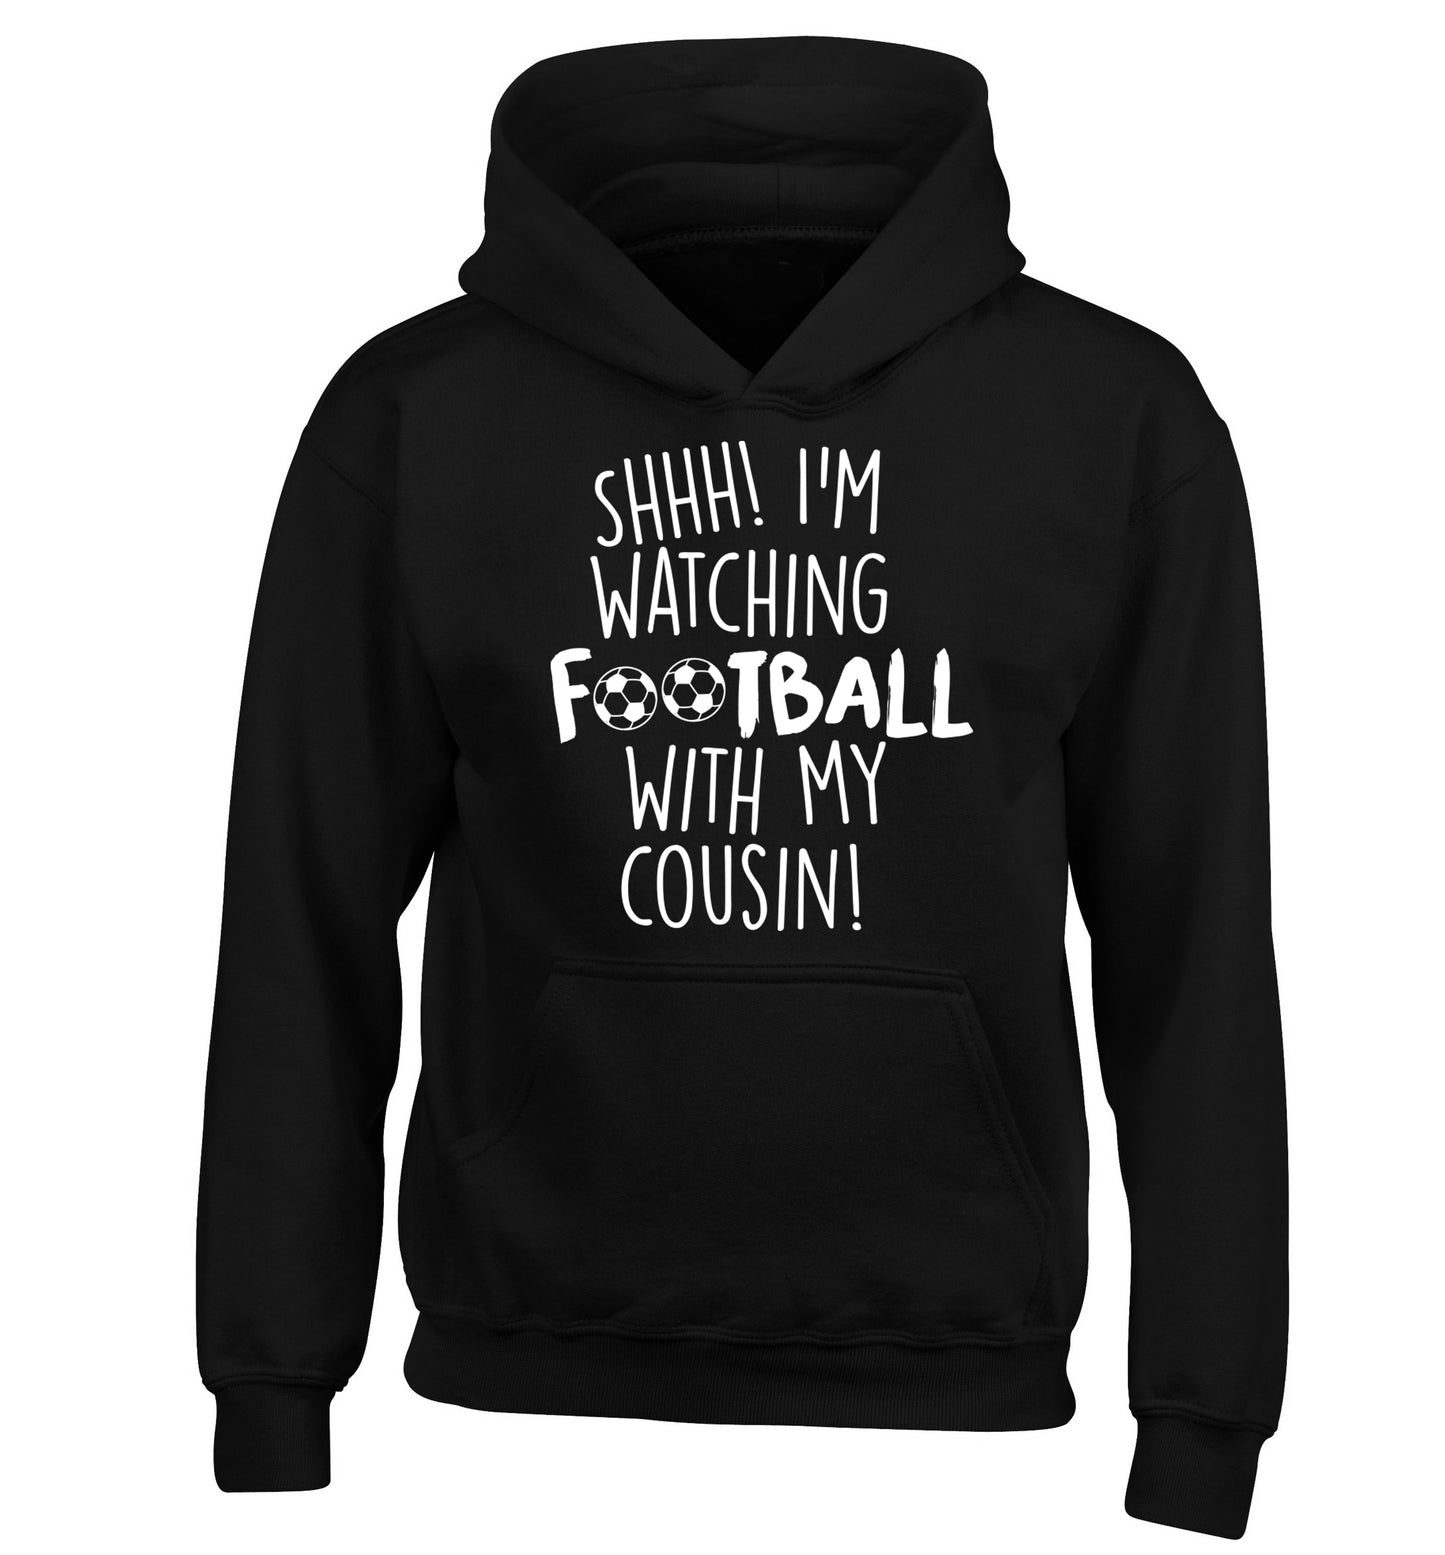 Shhh I'm watching football with my cousin children's black hoodie 12-14 Years